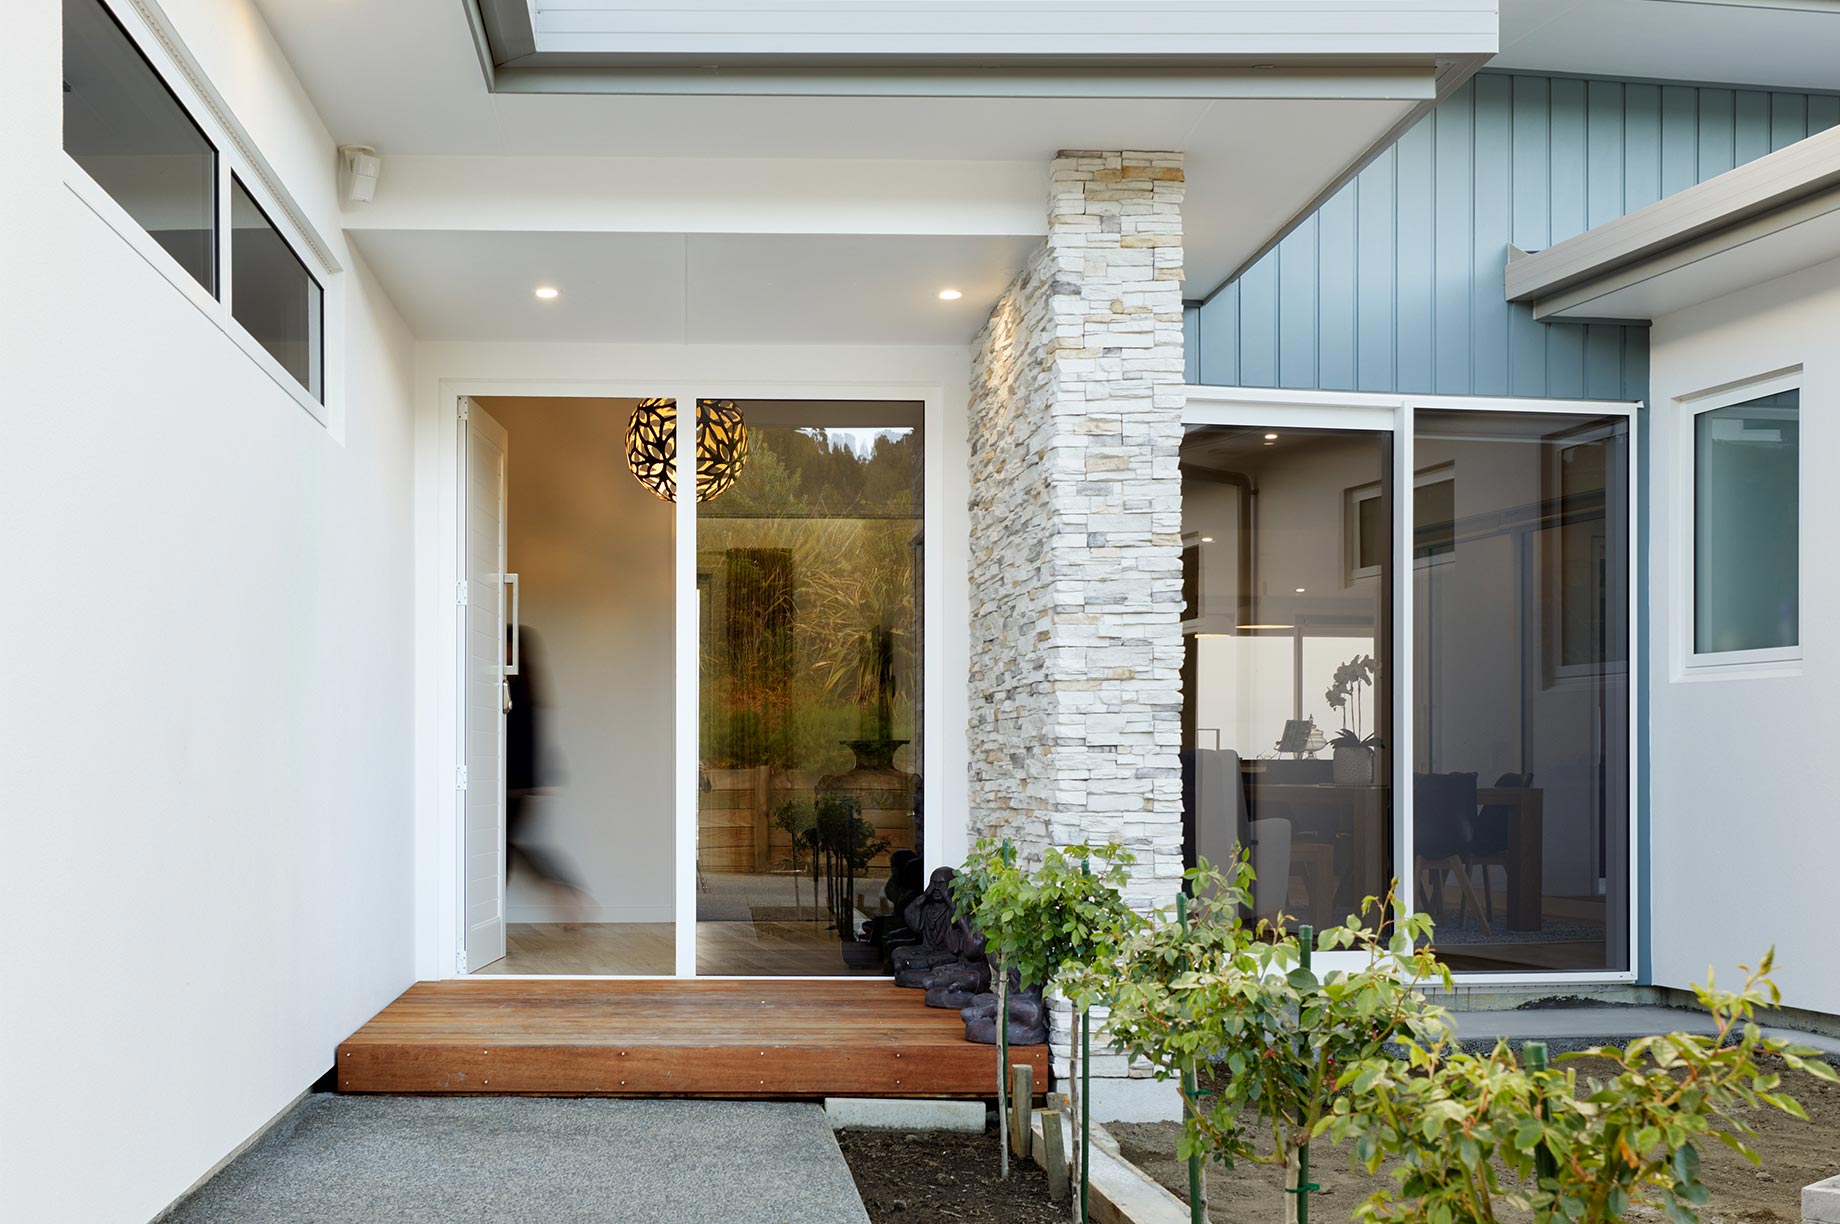 House entry with a white door exterior